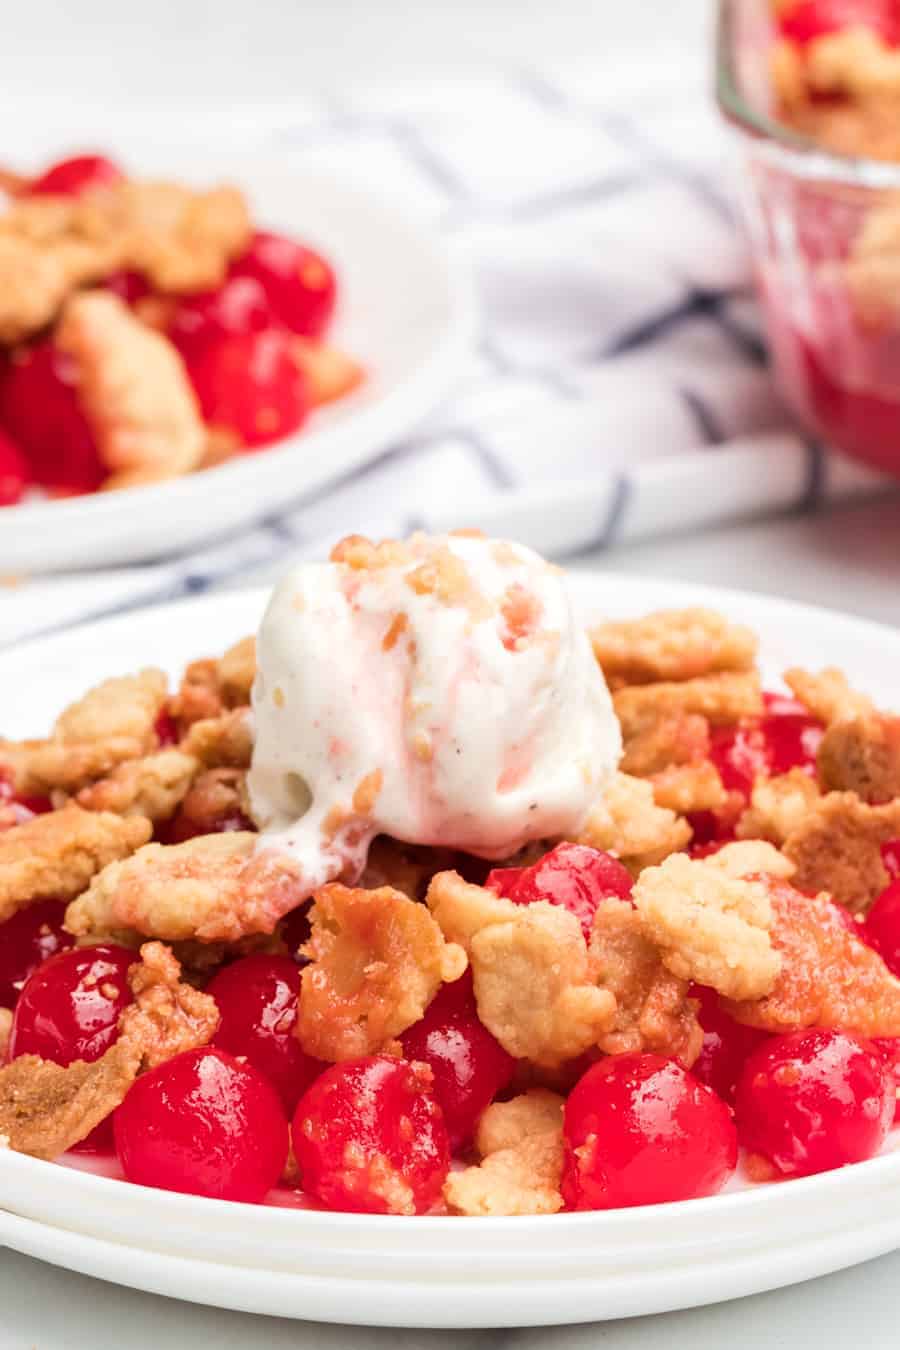 Sweet and tart with the perfect buttery, crumbly topping, homemade cherry crumble is an absolute game changer when it comes to festive and fun summertime dessert.